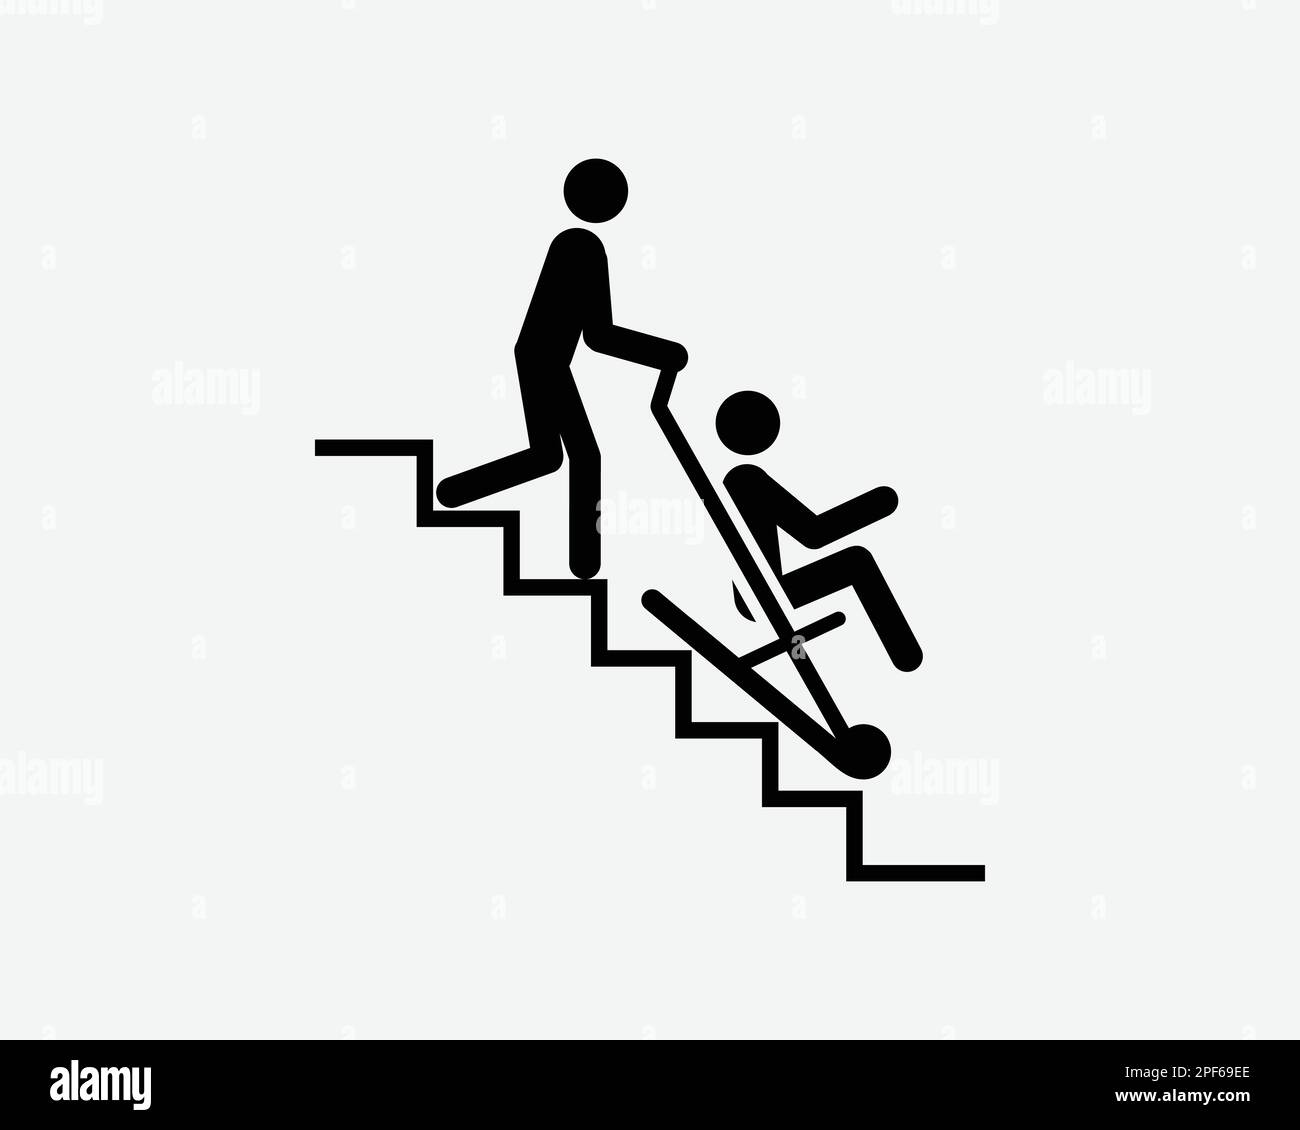 Emergency Evacuation Chair Stairs Steps Rescue Device Black White Silhouette Sign Symbol Icon Clipart Graphic Artwork Pictogram Illustration Vector Stock Vector